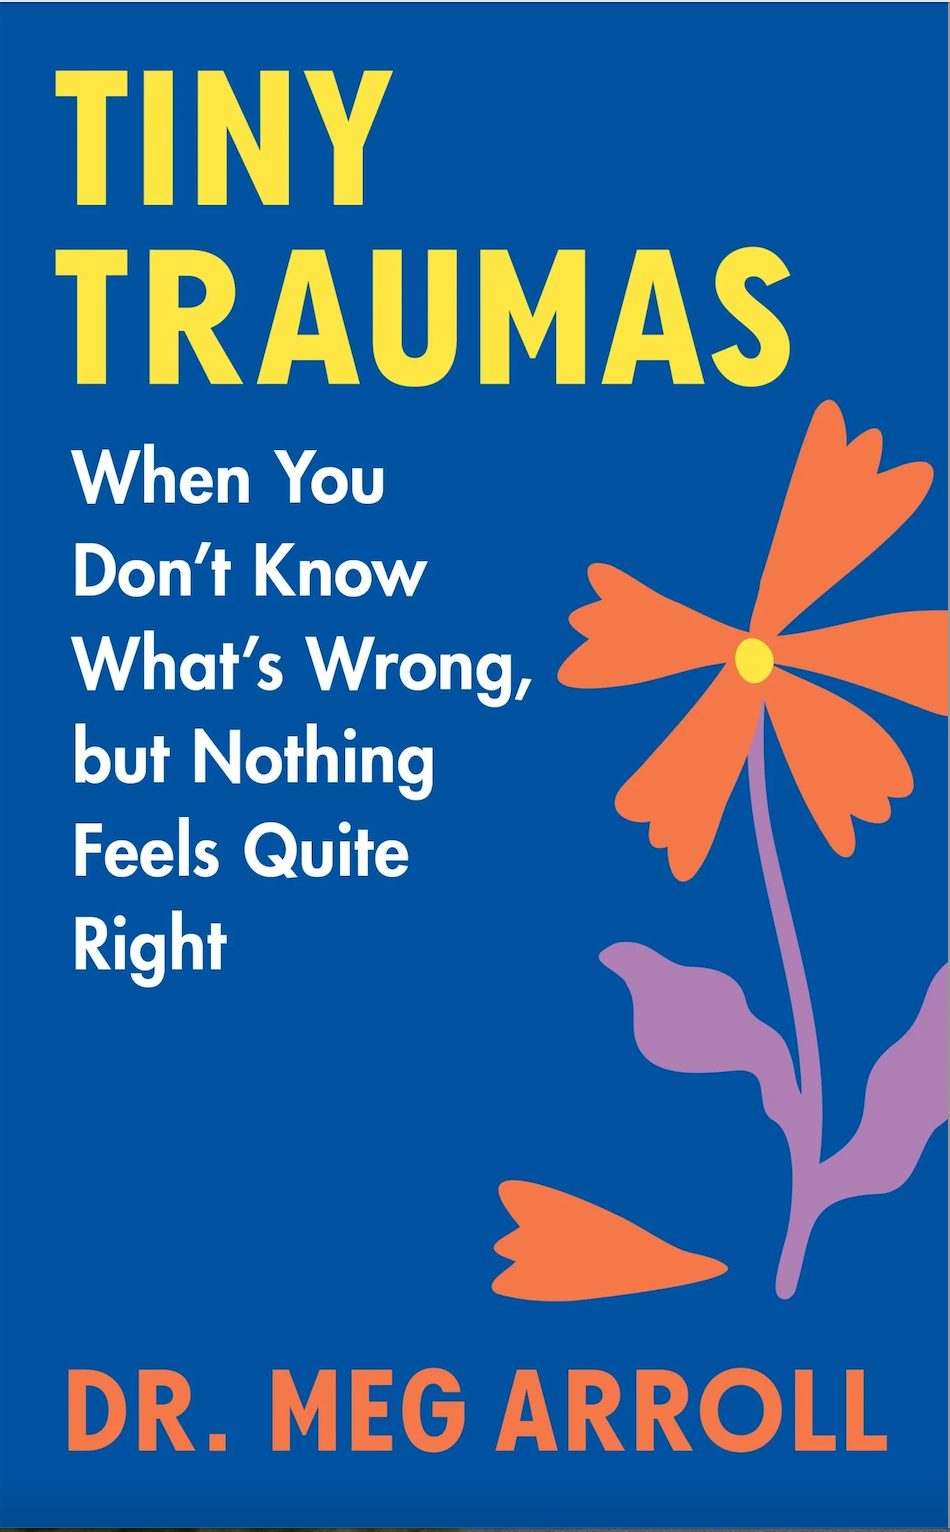 Tiny Traumas: When You Don't Know What's Wrong